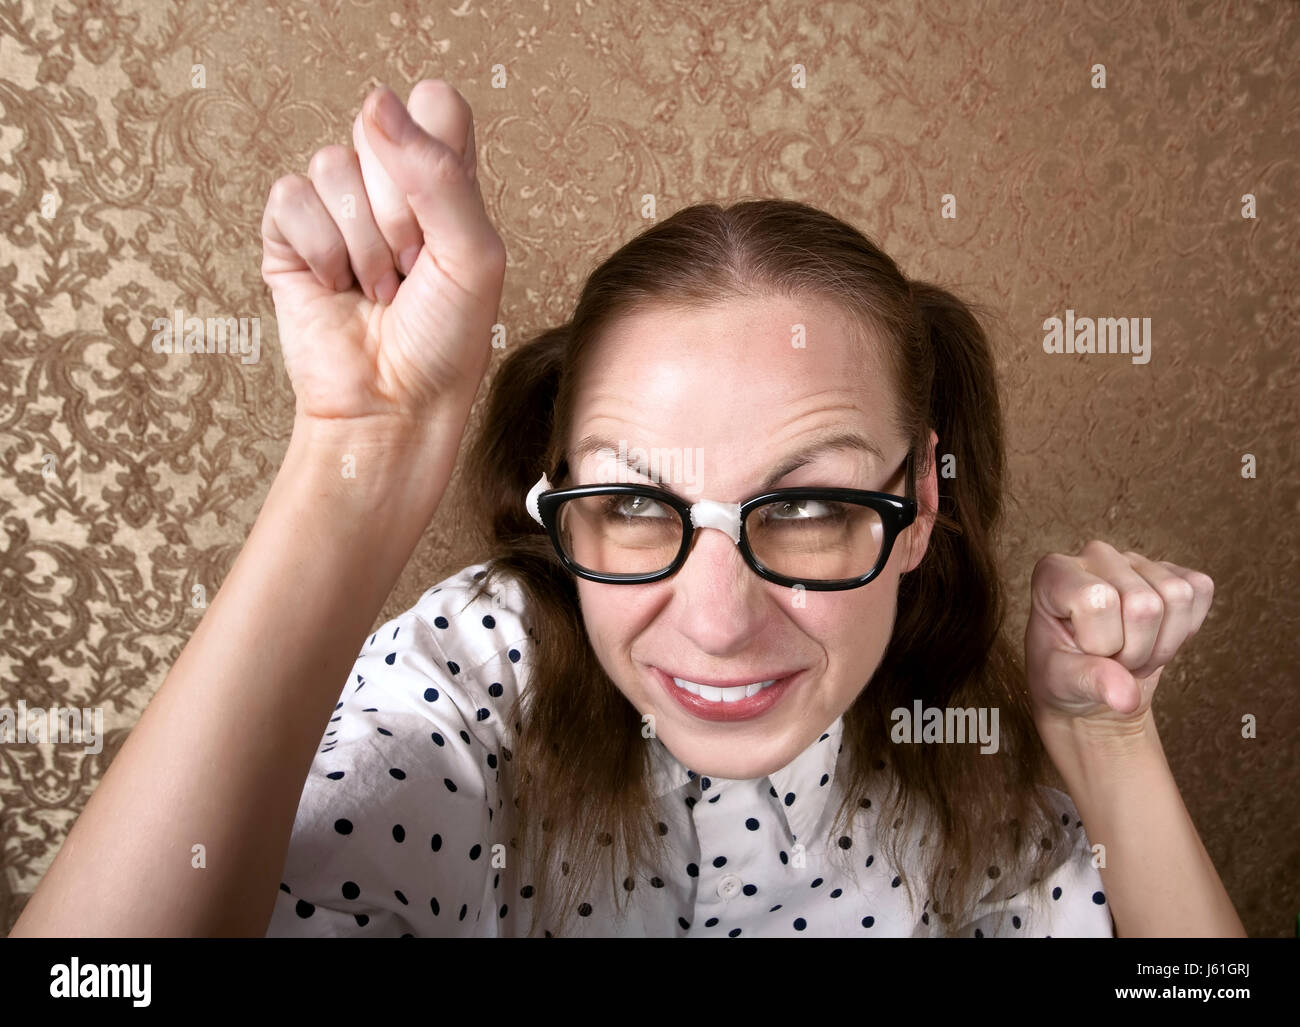 lady female silly loser woman laugh laughs laughing twit giggle smile smiling Stock Photo